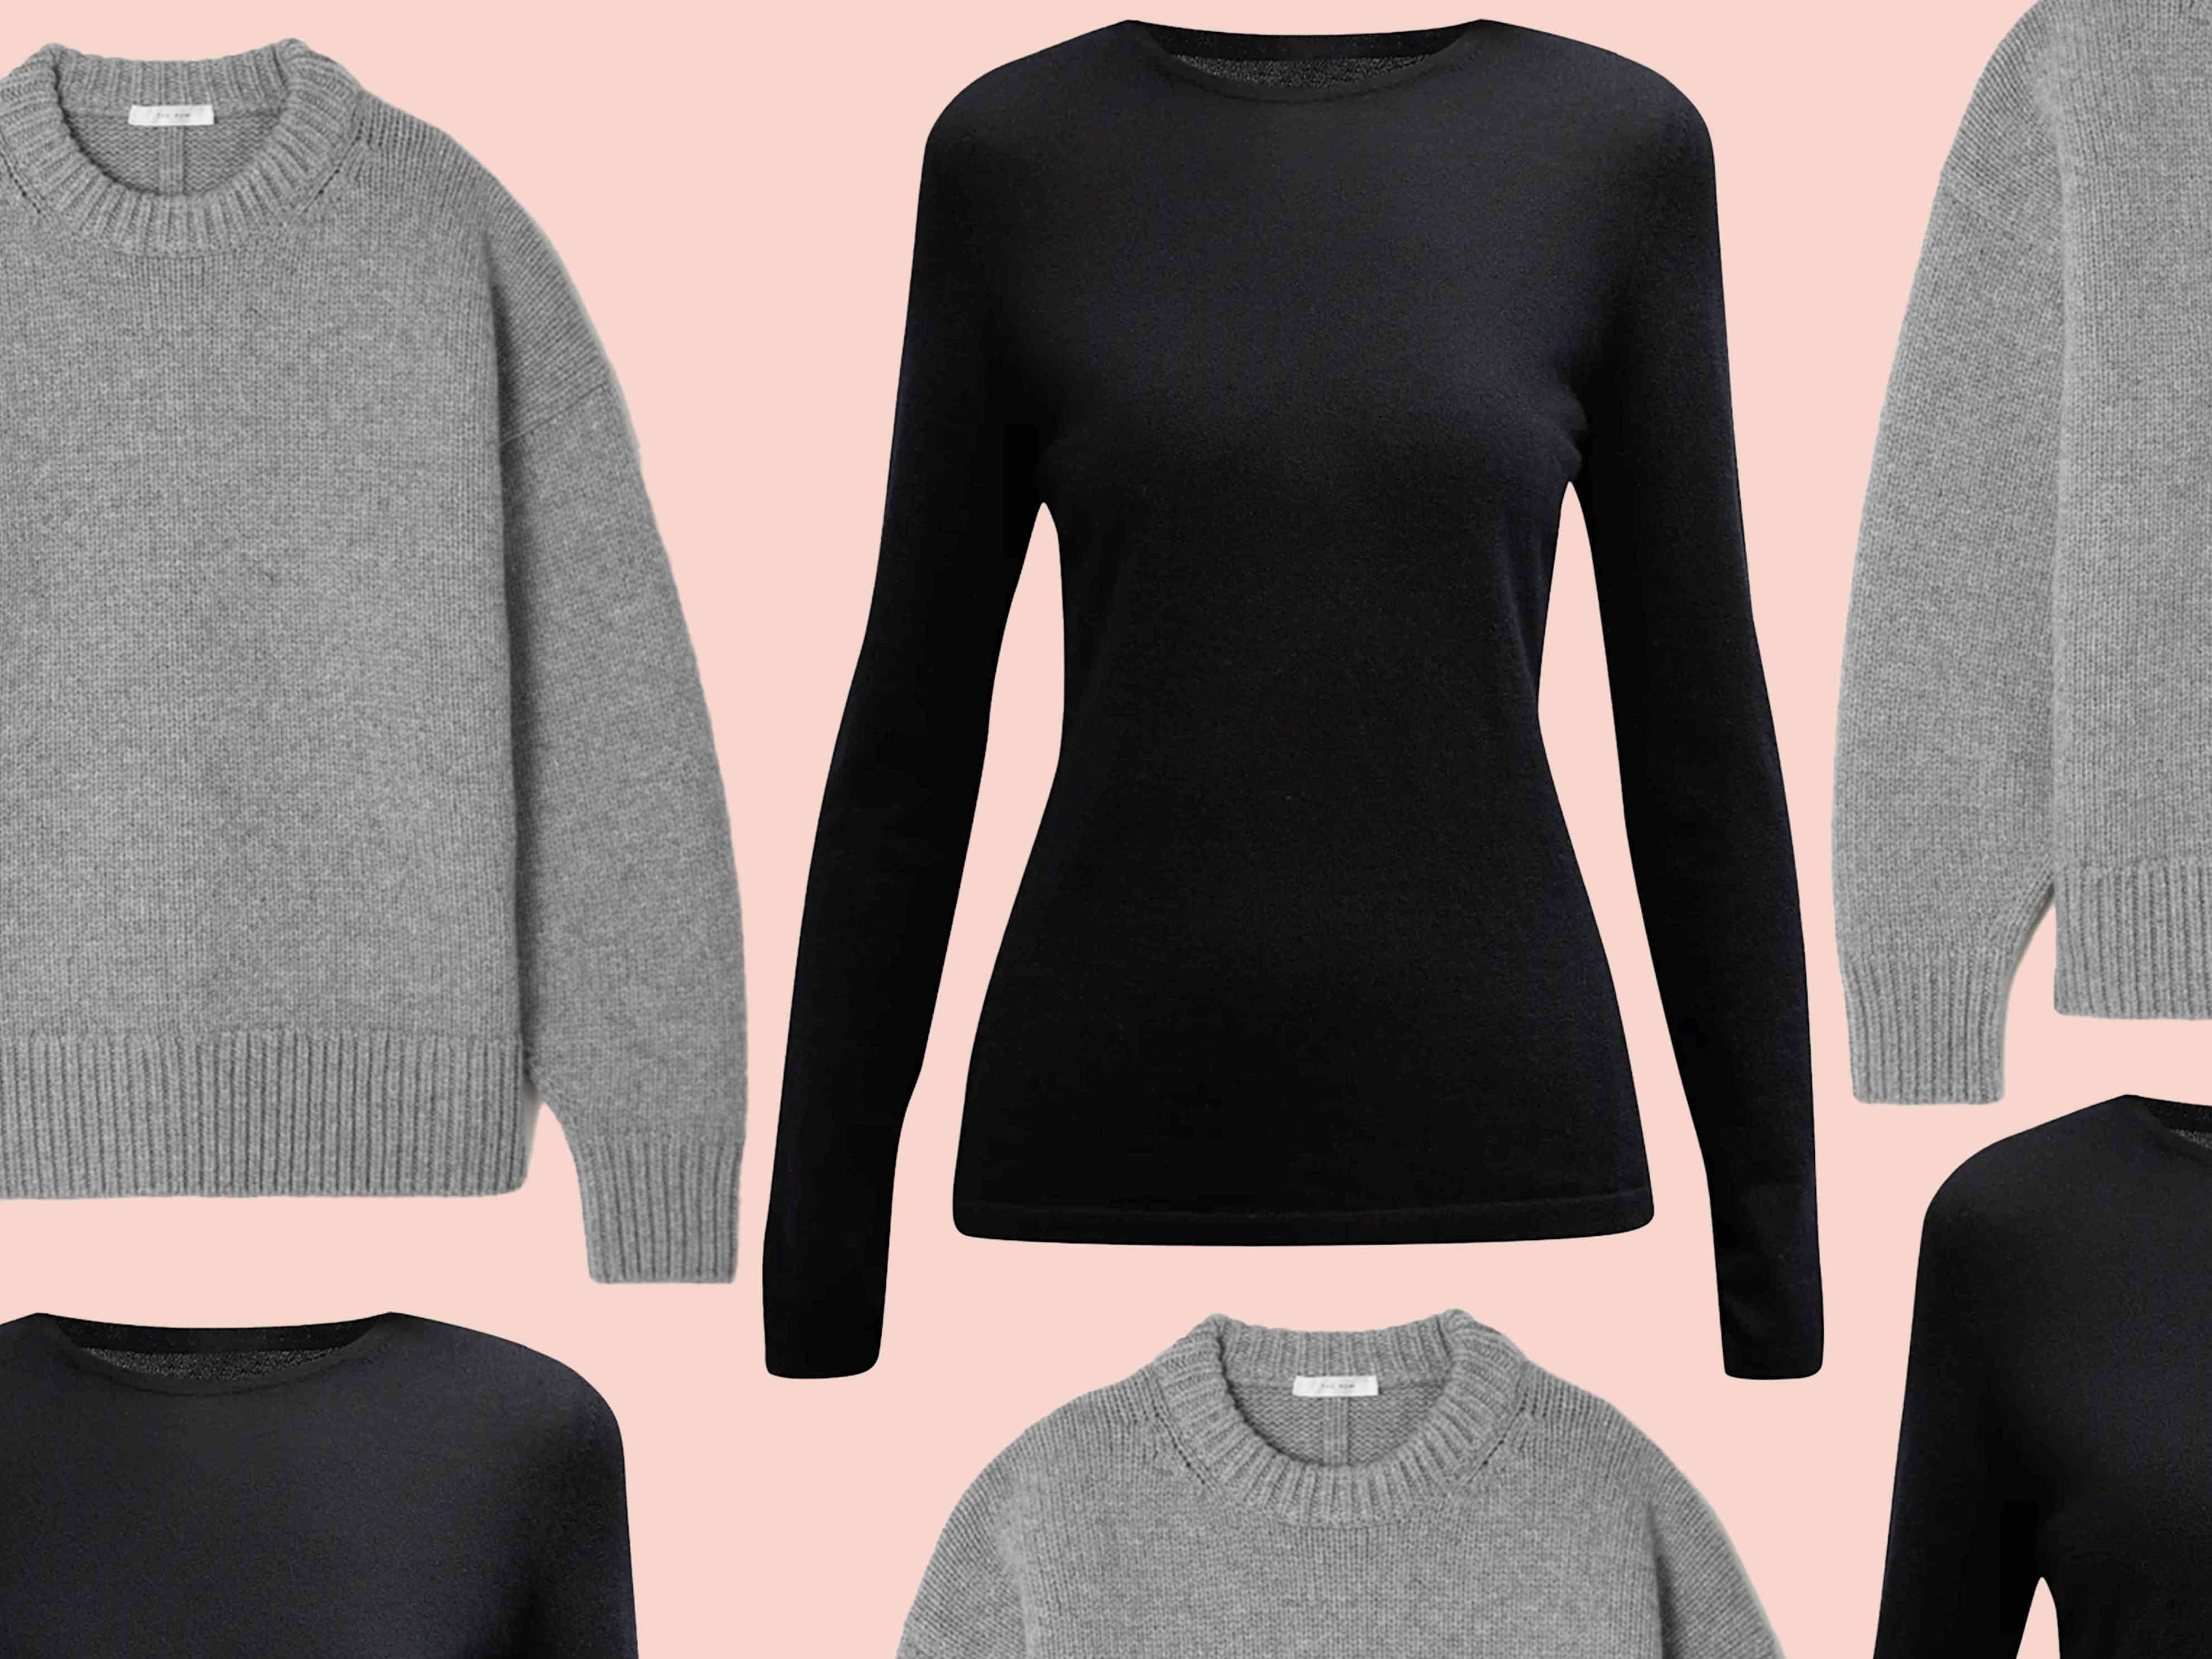 The 15 Best Cashmere Sweaters For Every Style and Budget